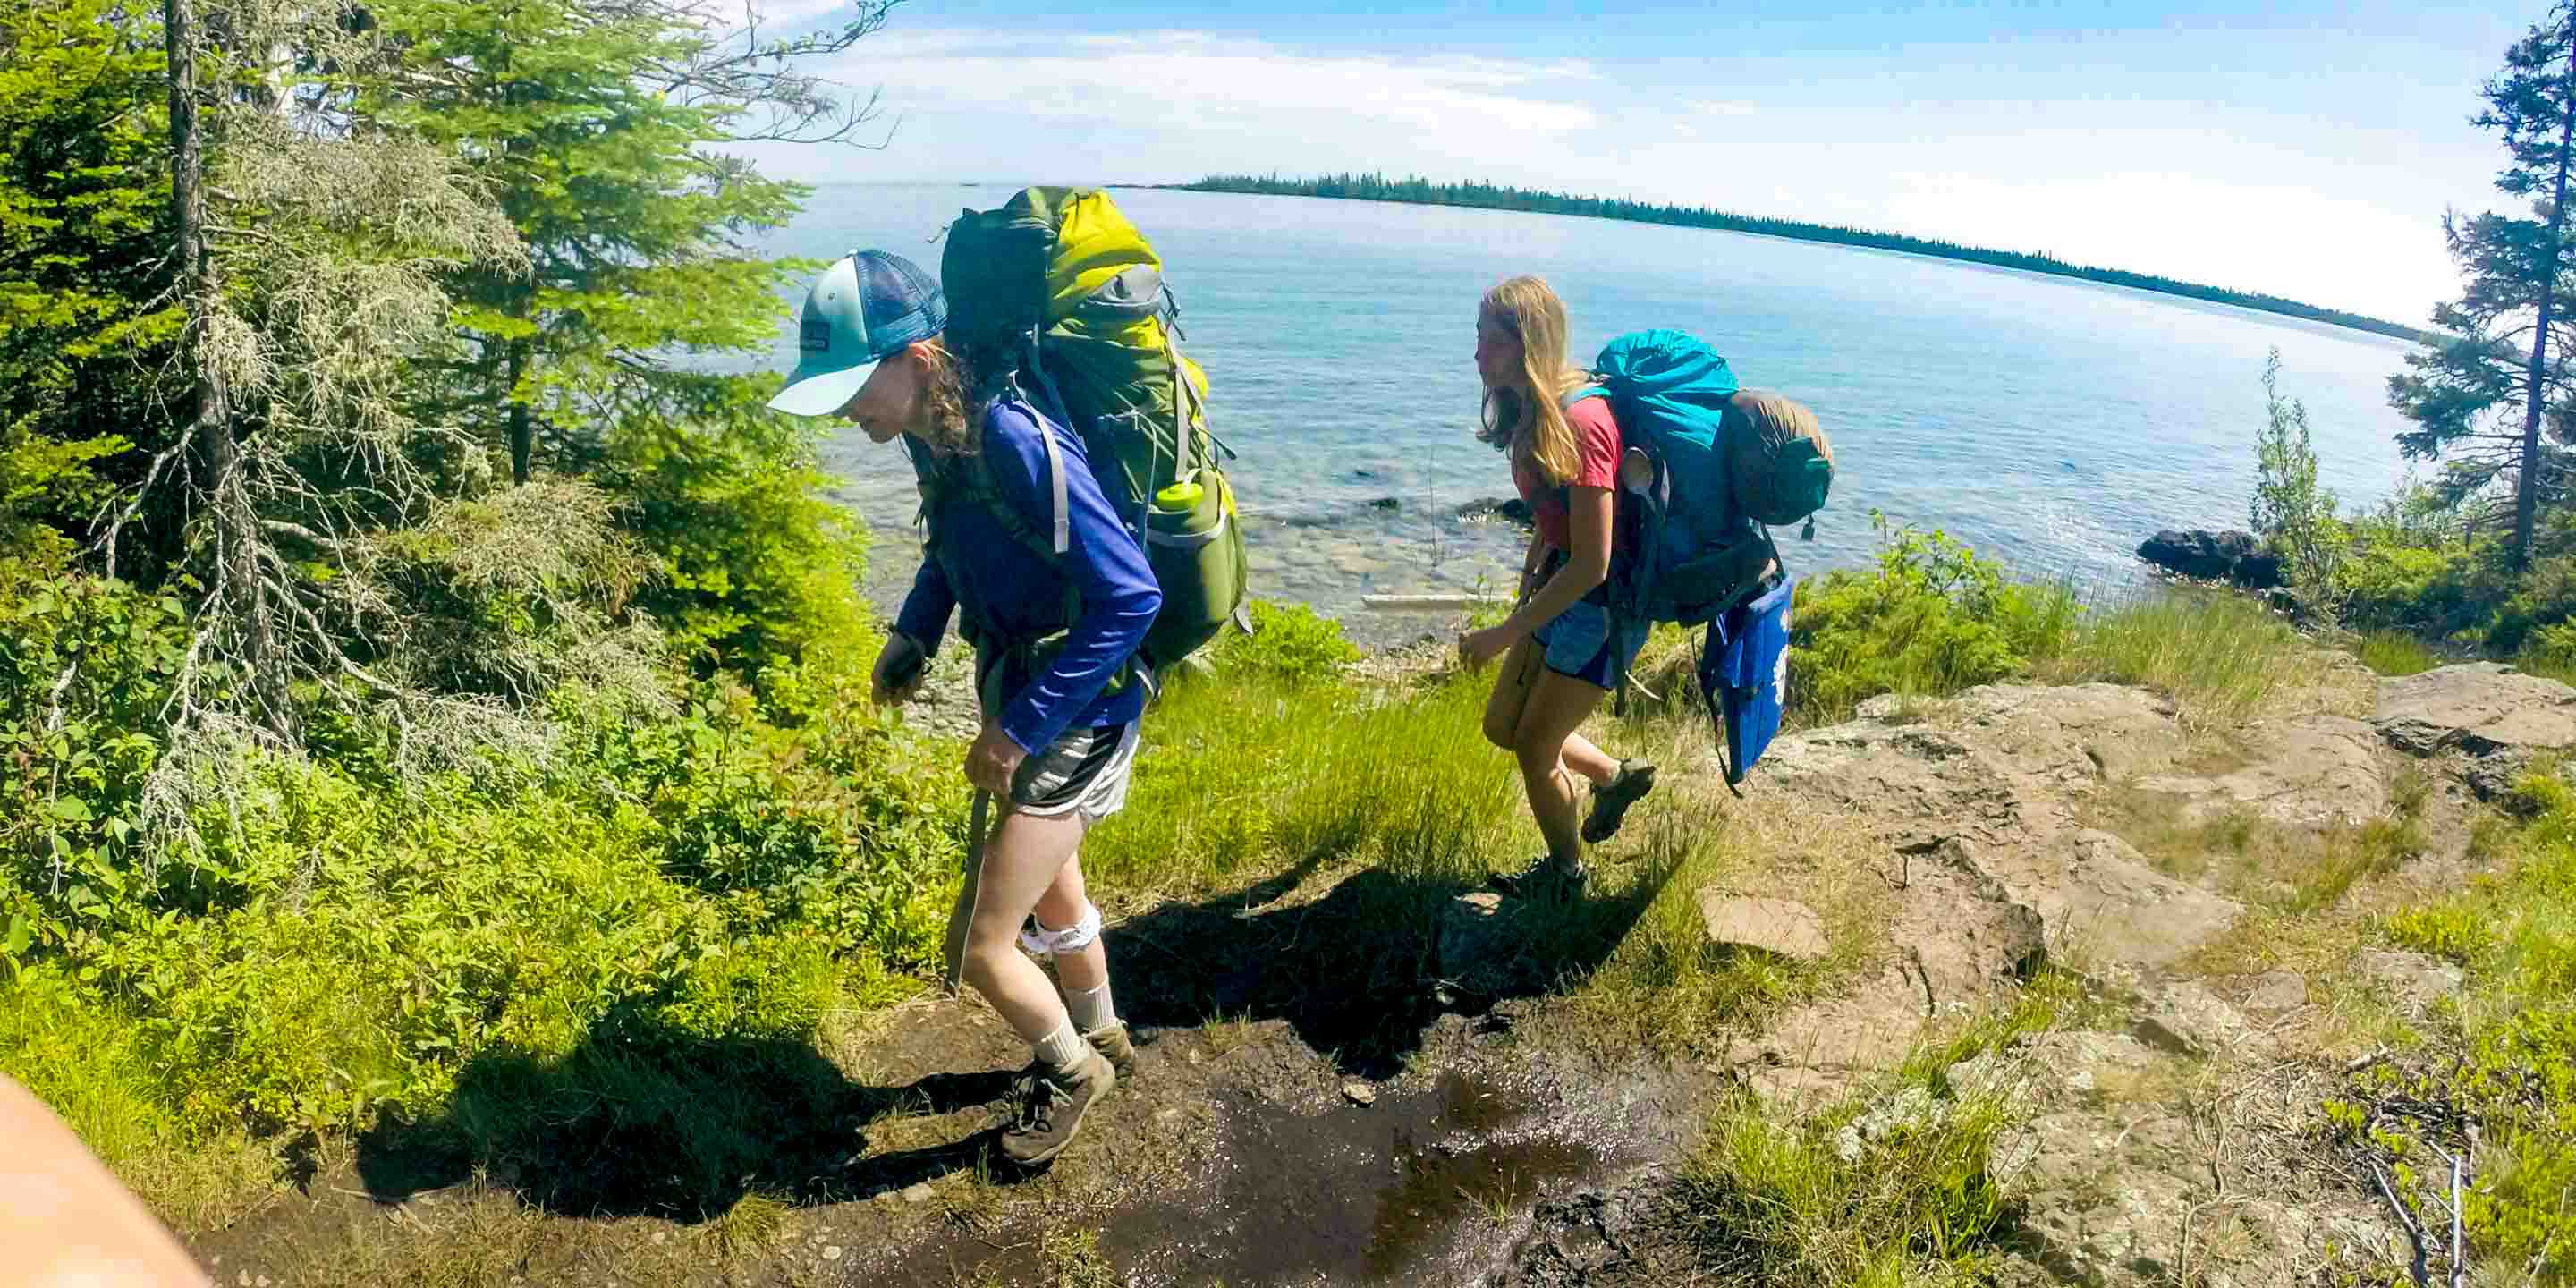 Girls backpack along lakeshore during camp trip